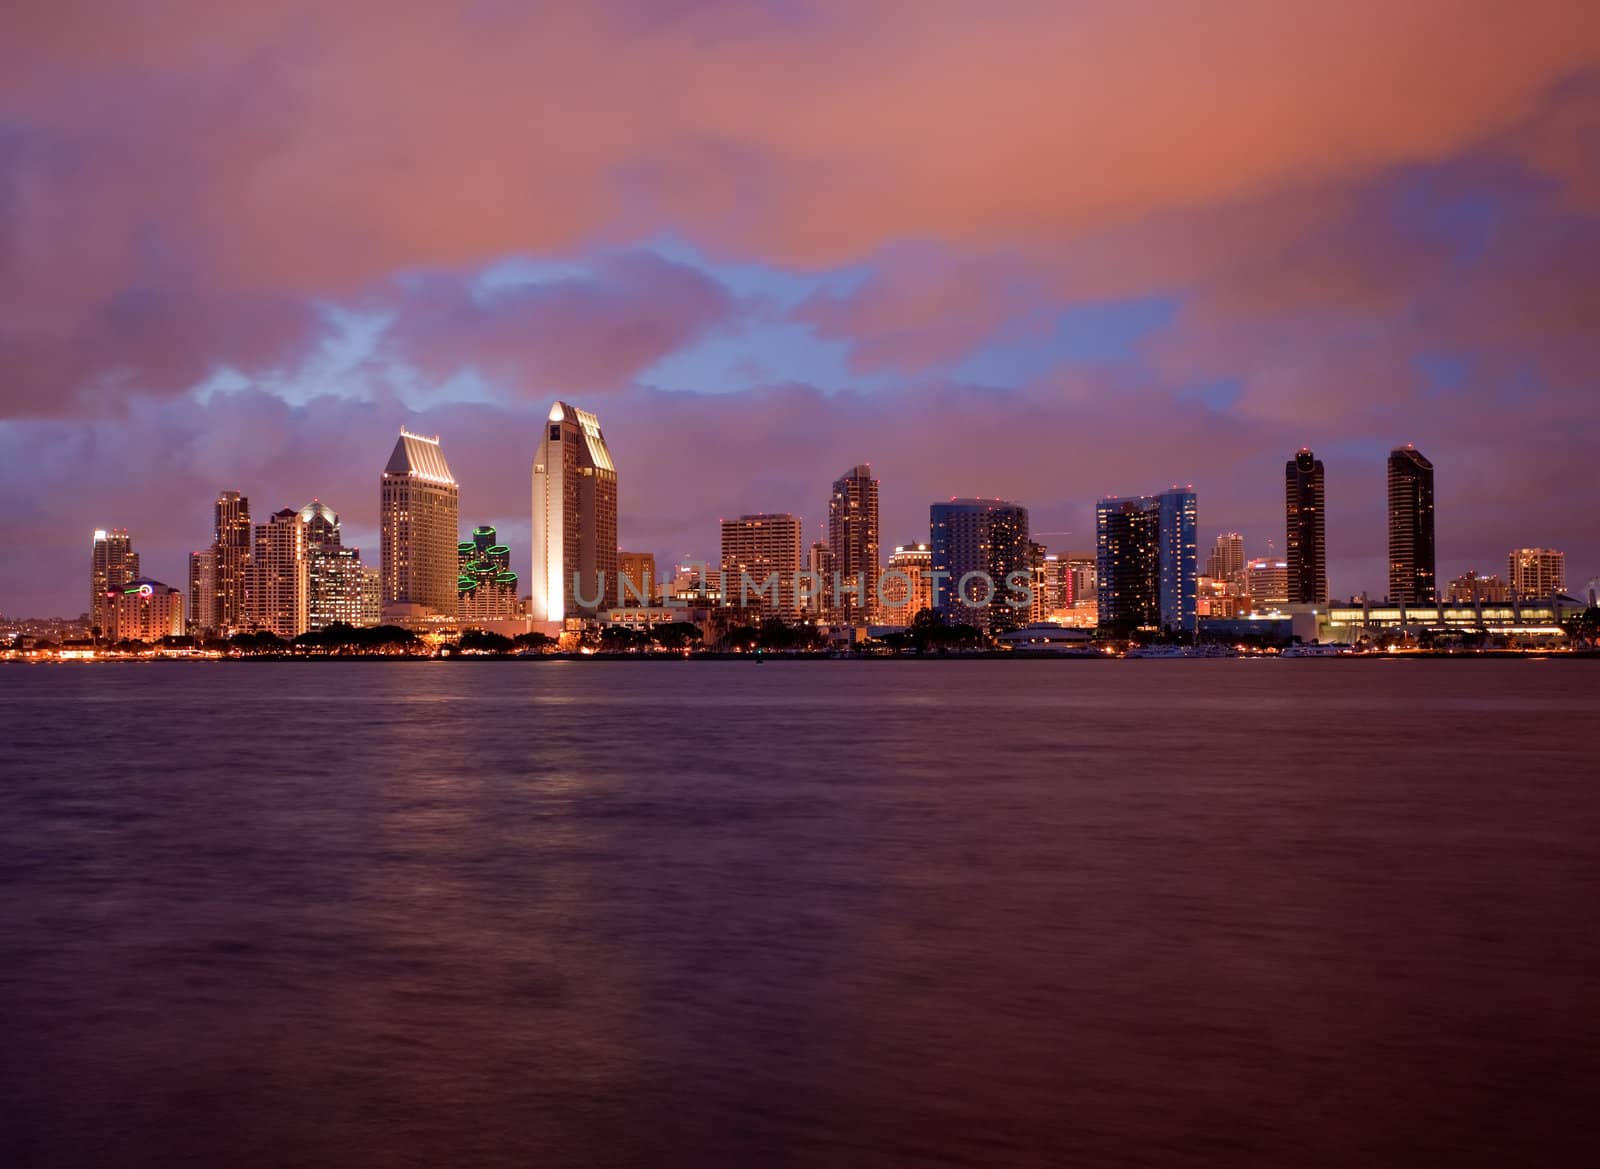 Sunset on San Diego skyline with city lights reflected in clouds taken from Coronado